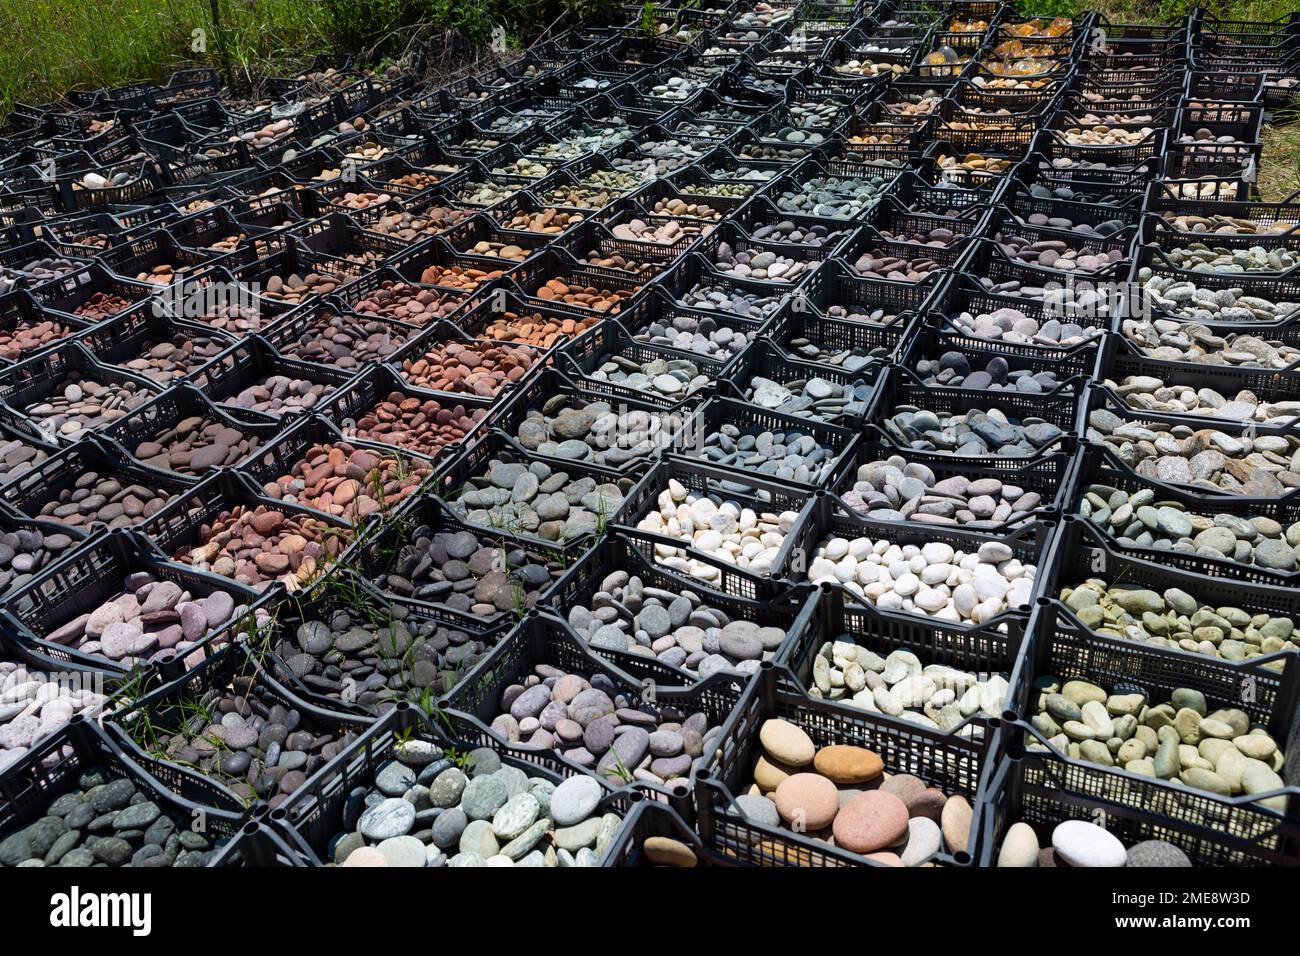 Collection of natural coloured stones used for art at Dreamwoods Park, hidden in the hills of Tuscany, designed by German artist Deva Manfredo, Italy. Stock Photo